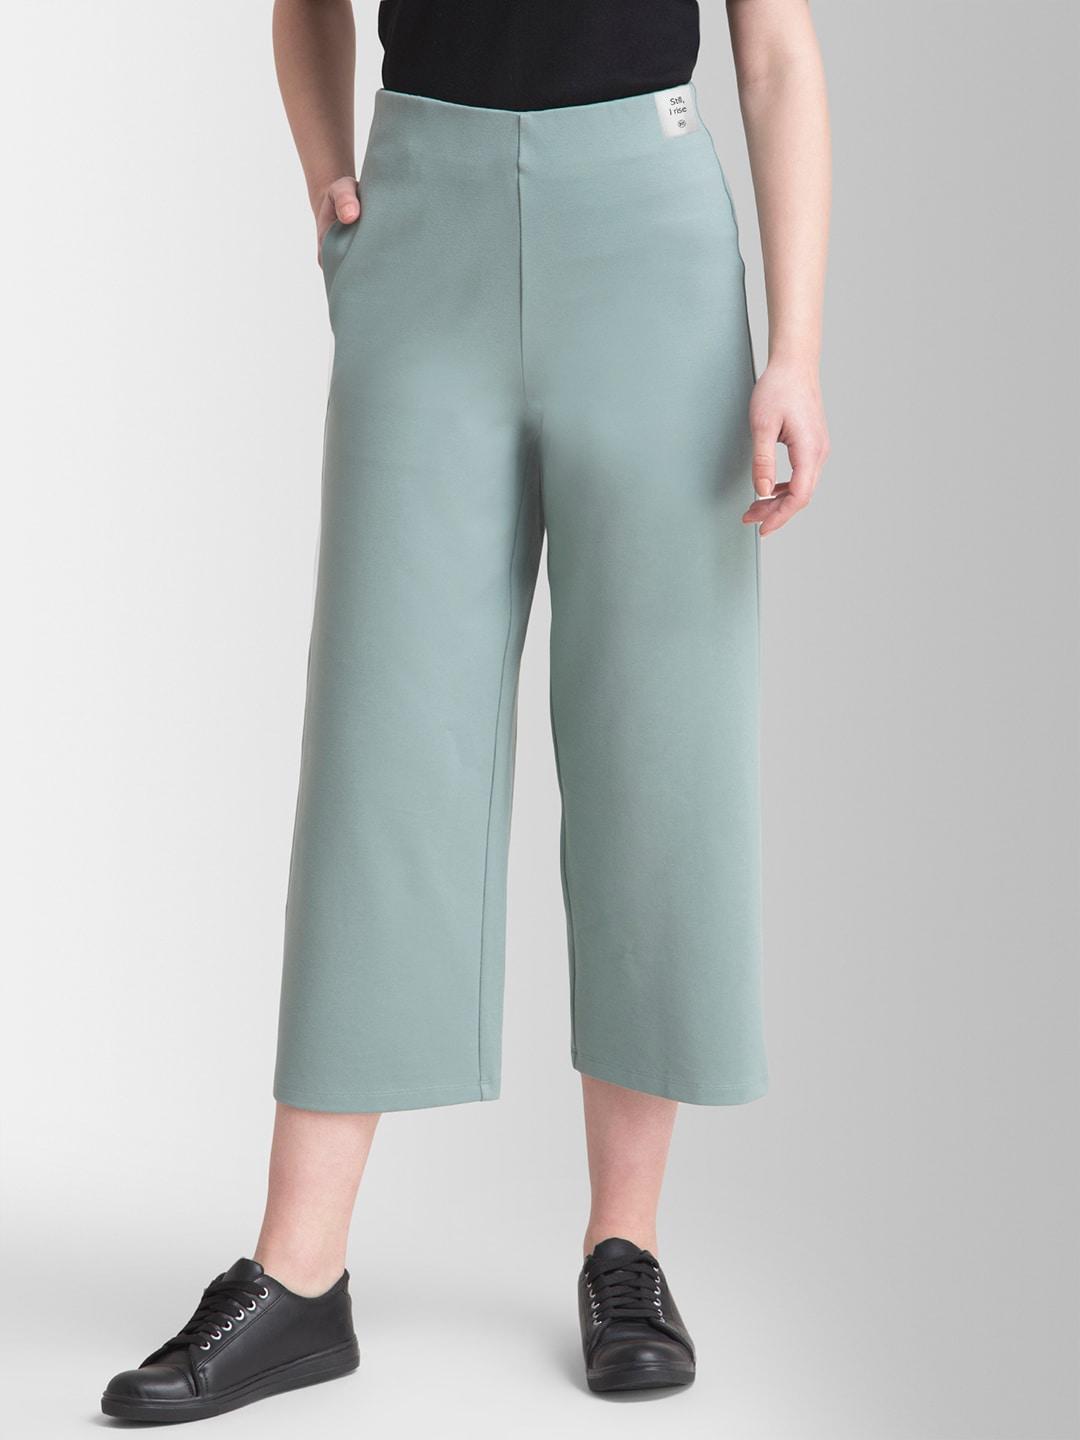 fablestreet-women-green-loose-fit-solid-livin-culottes